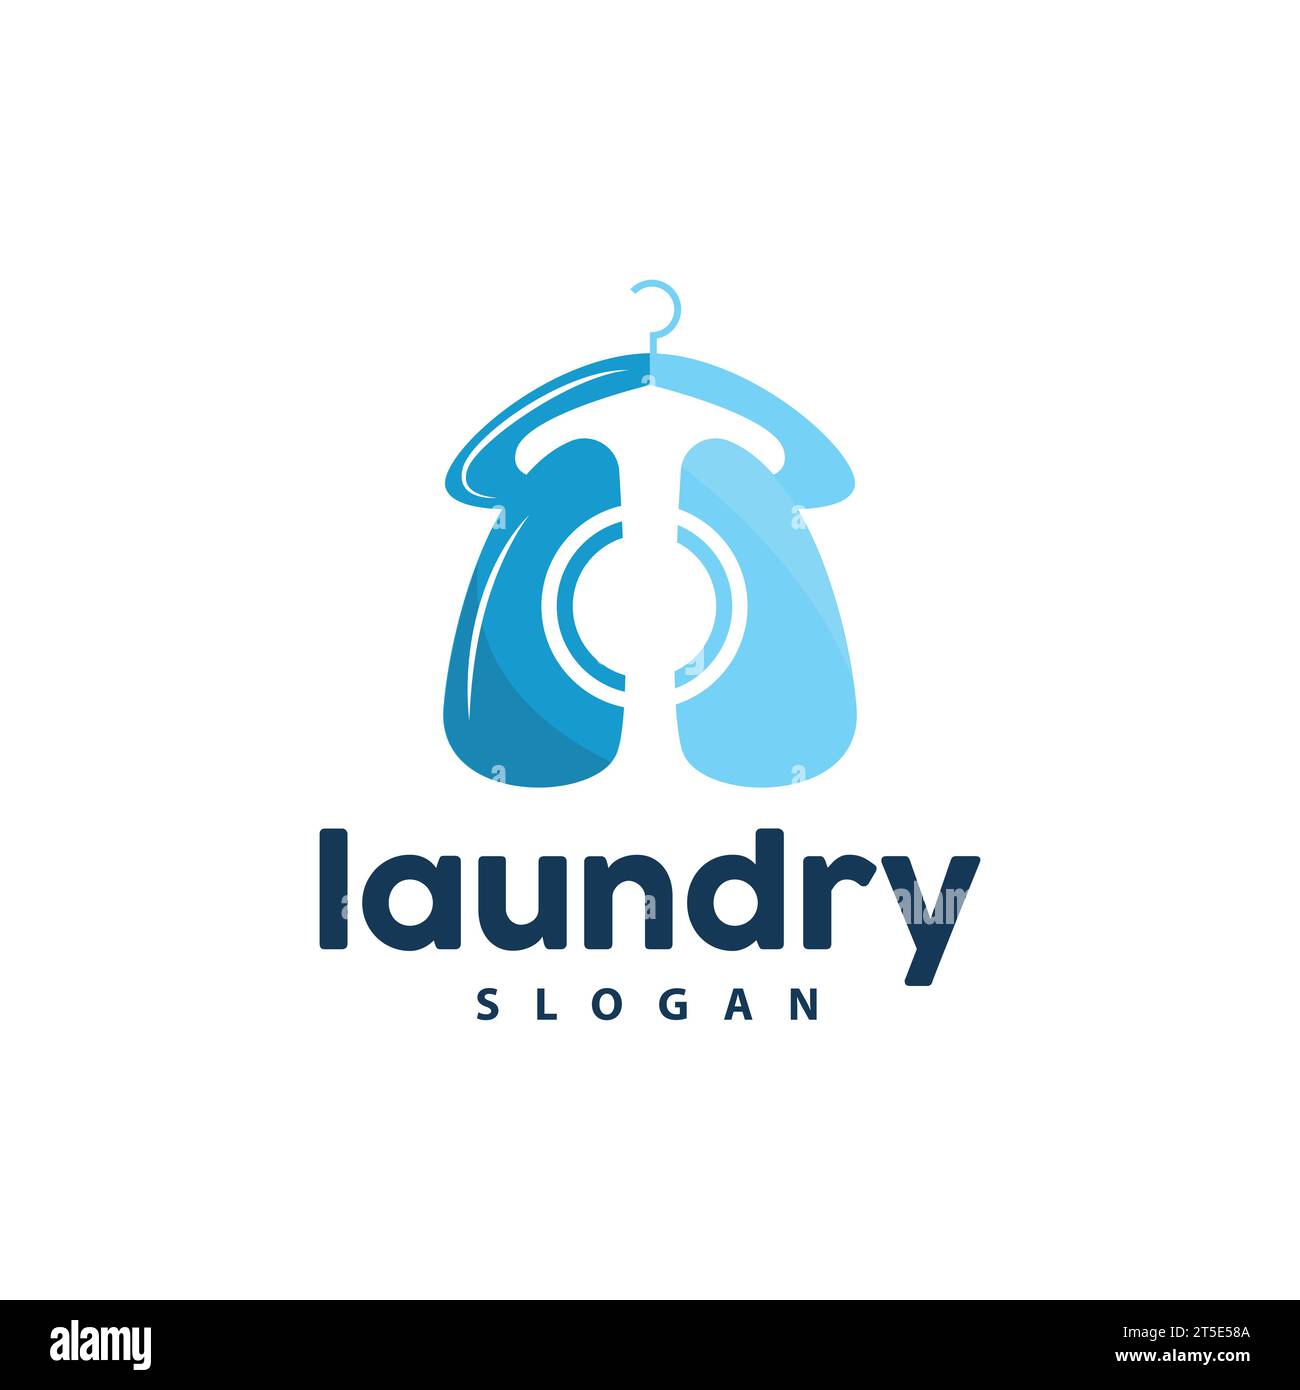 Laundry Logo, Cleaning Washing Vector, Laundry Icon With Washing Machine, Clothes and Foam Bubble, Illustration Symbol Design Template Stock Vector